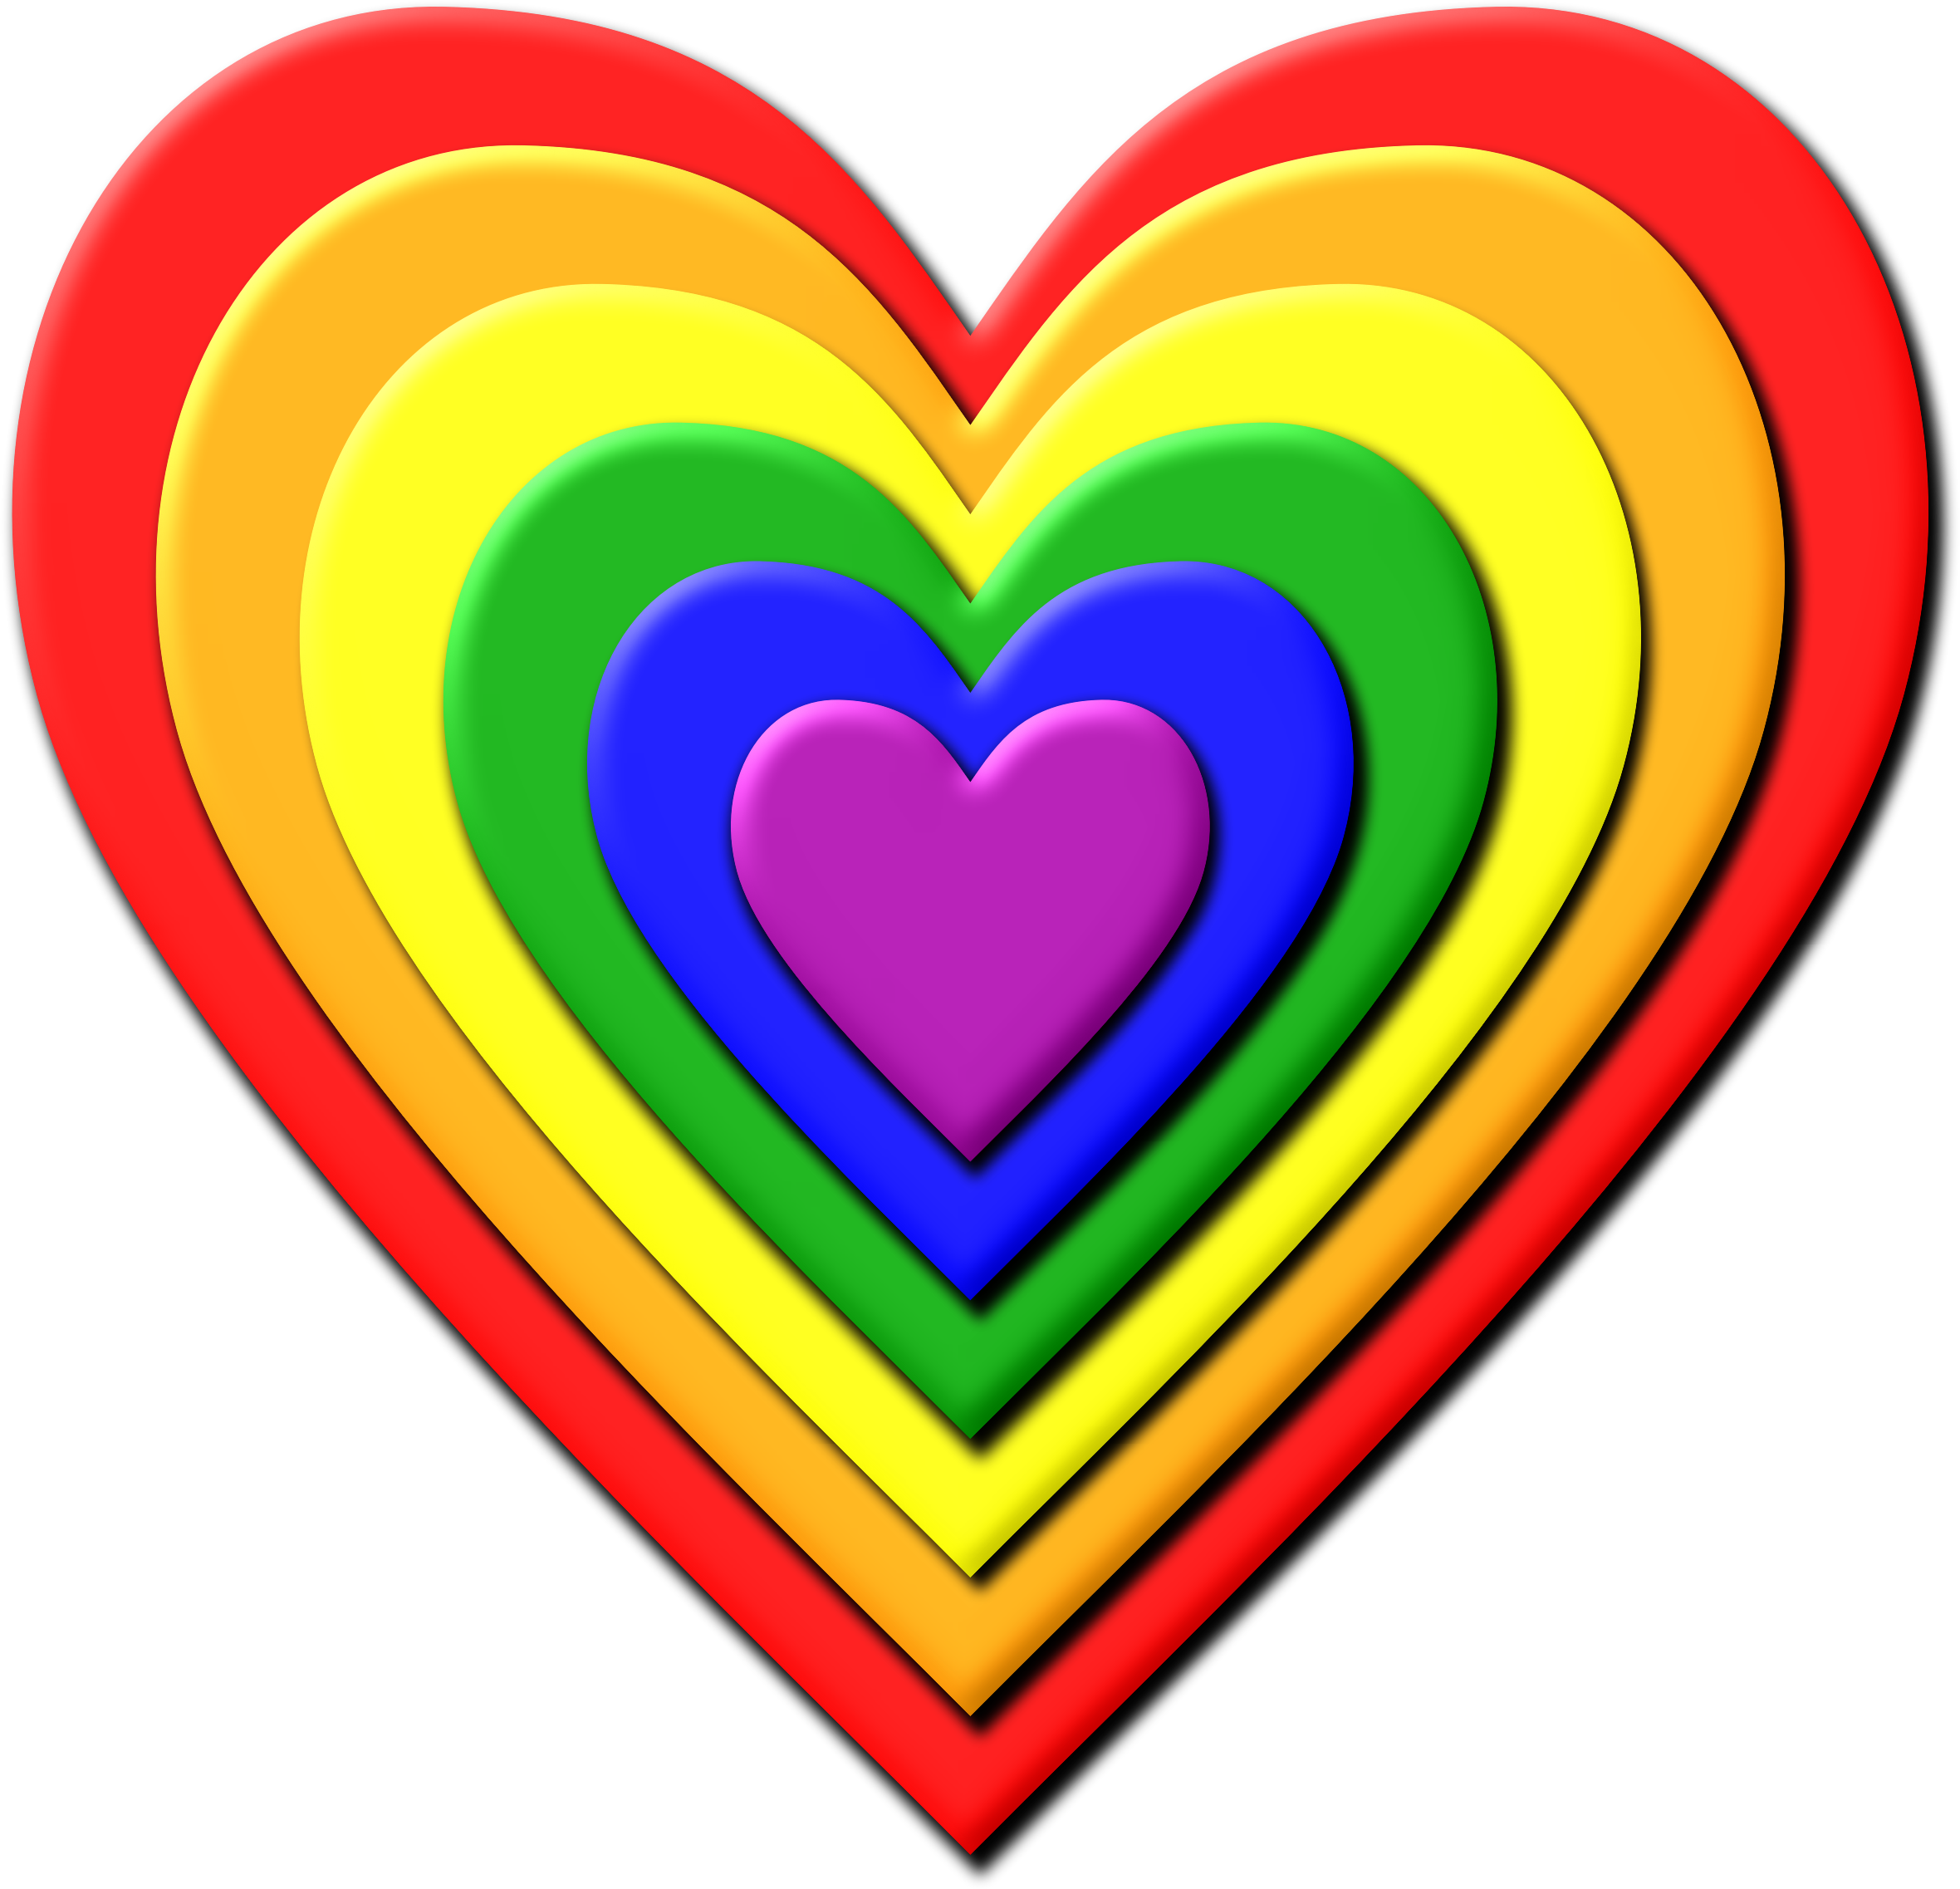 Download Multi Layered Rainbow Heart Vector Clipart image - Free ...